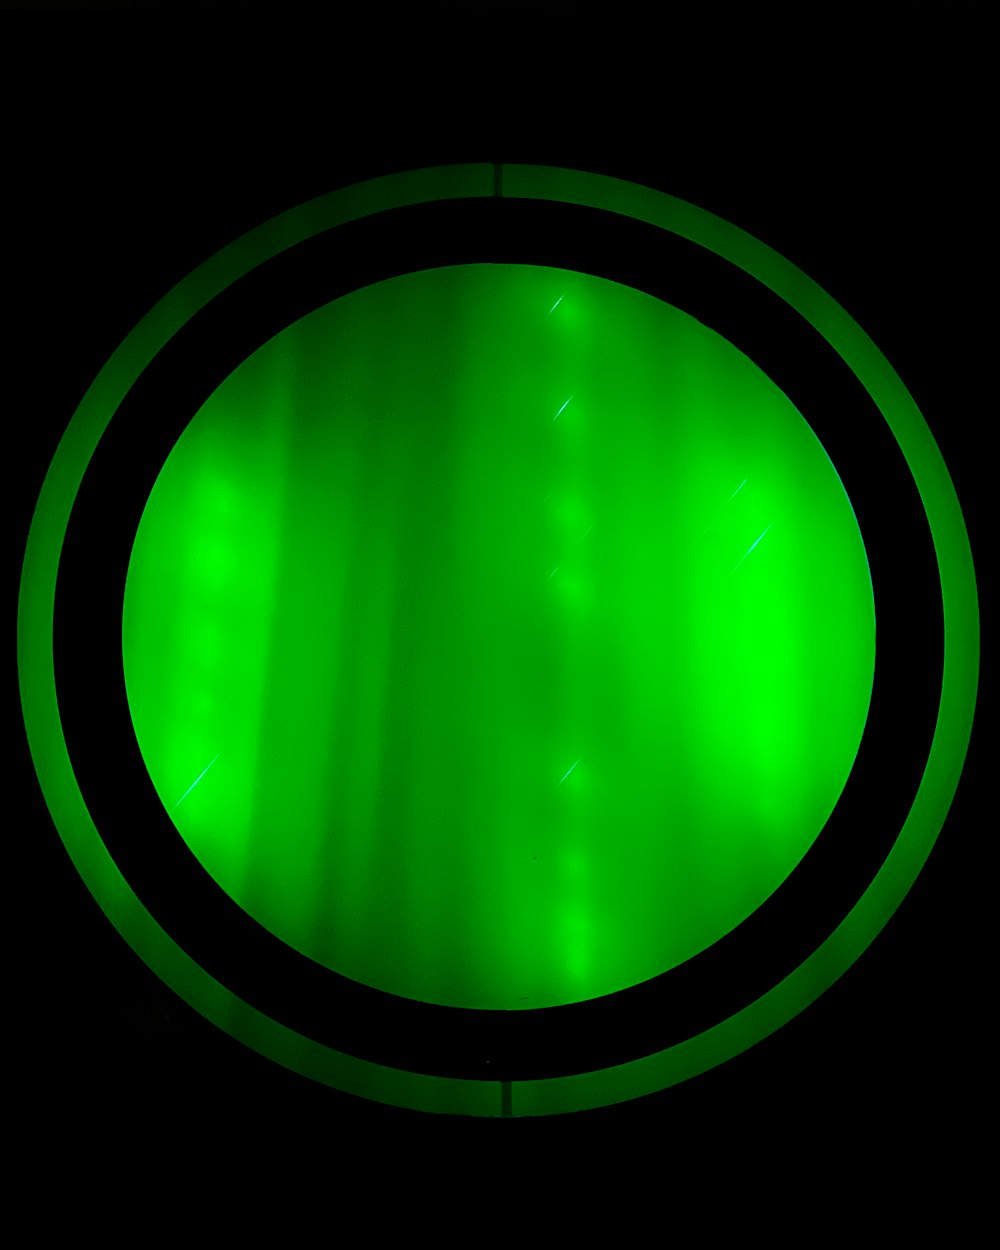 a close up of a green light in the dark